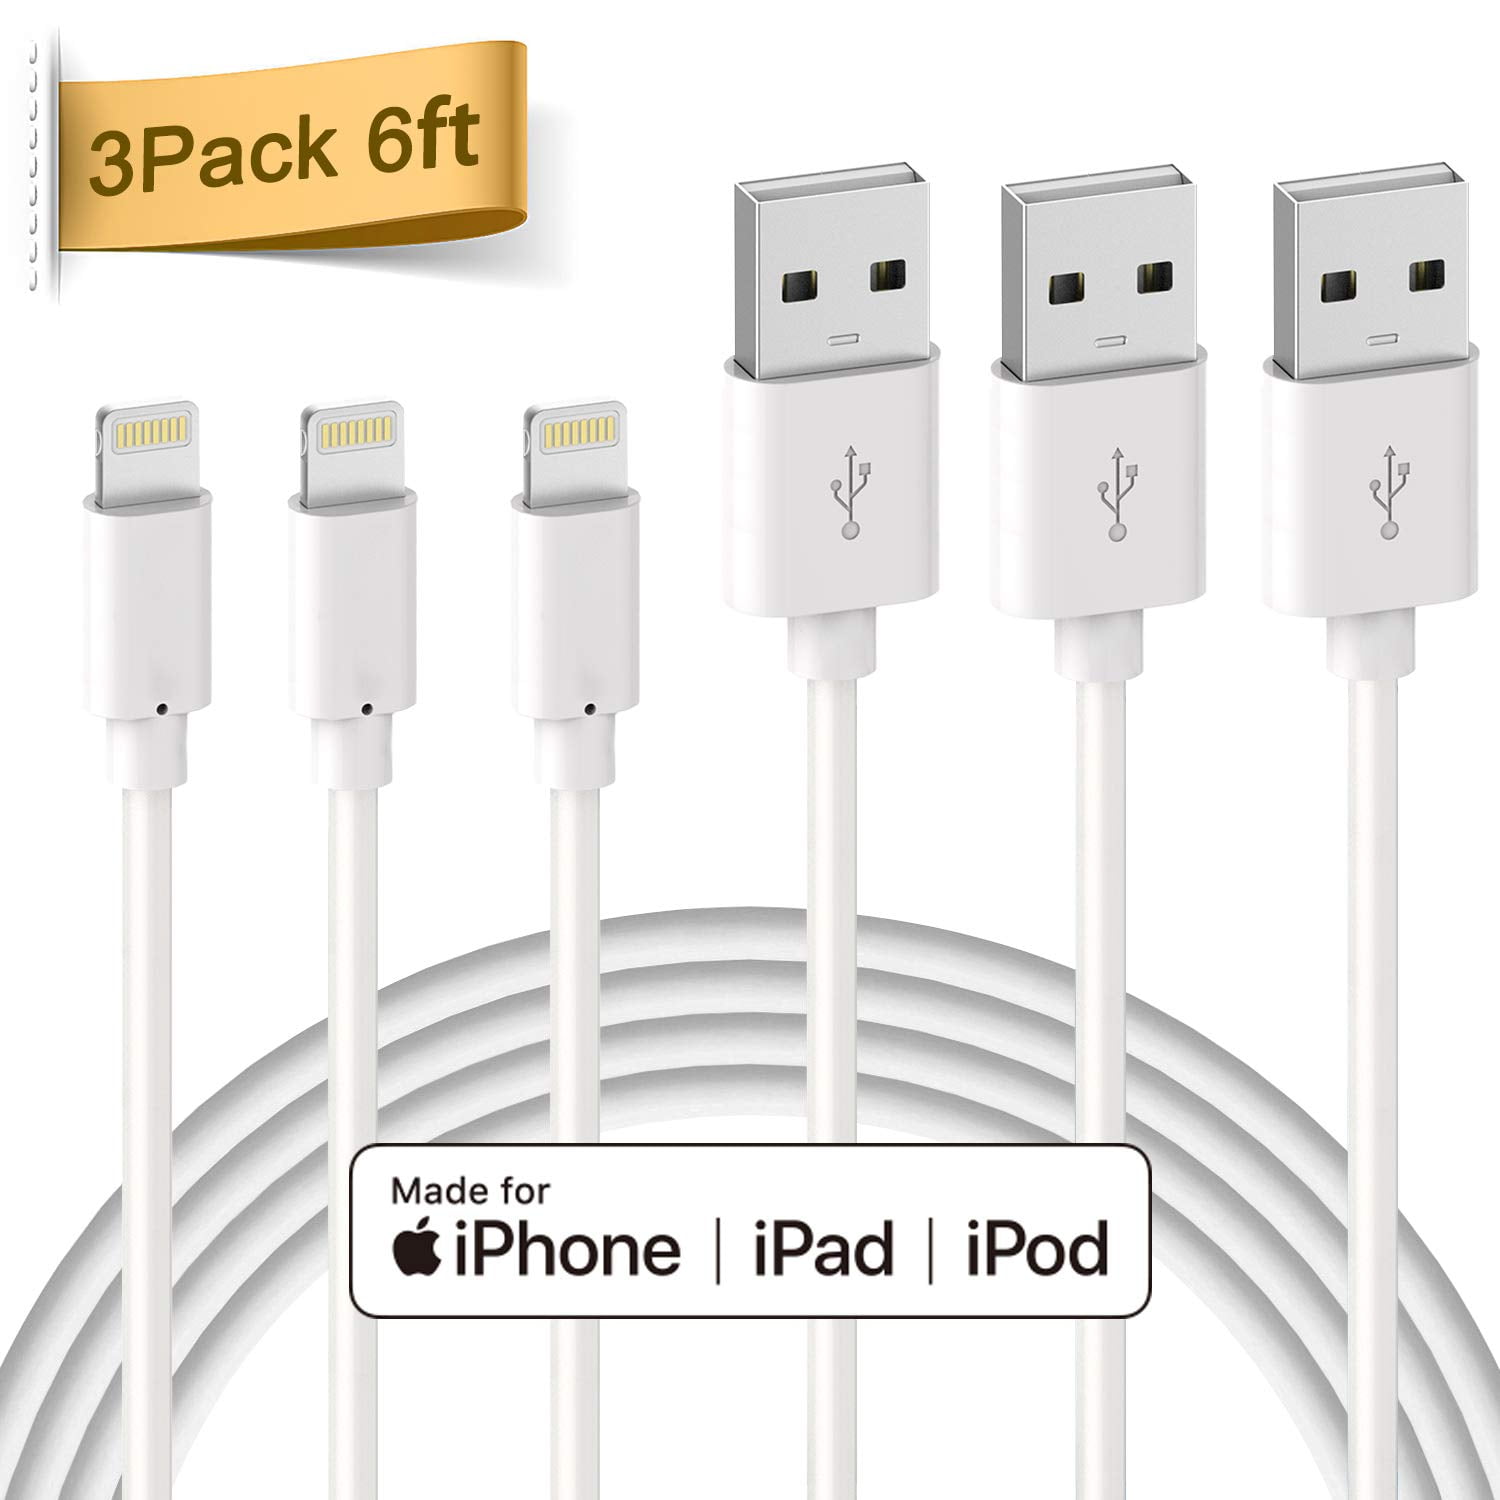 Fast Charging & Syncing Cord Charge+ 2X 3FT USB Cable Compatible with iPhone 11,Pro,Pro Max,Xs,Xs Max,XR,X,8,8 Plus,7,7 Plus,6S,6S Plus,iPad Air,Mini/iPod Touch/Case iPhone Charging Cable Set 